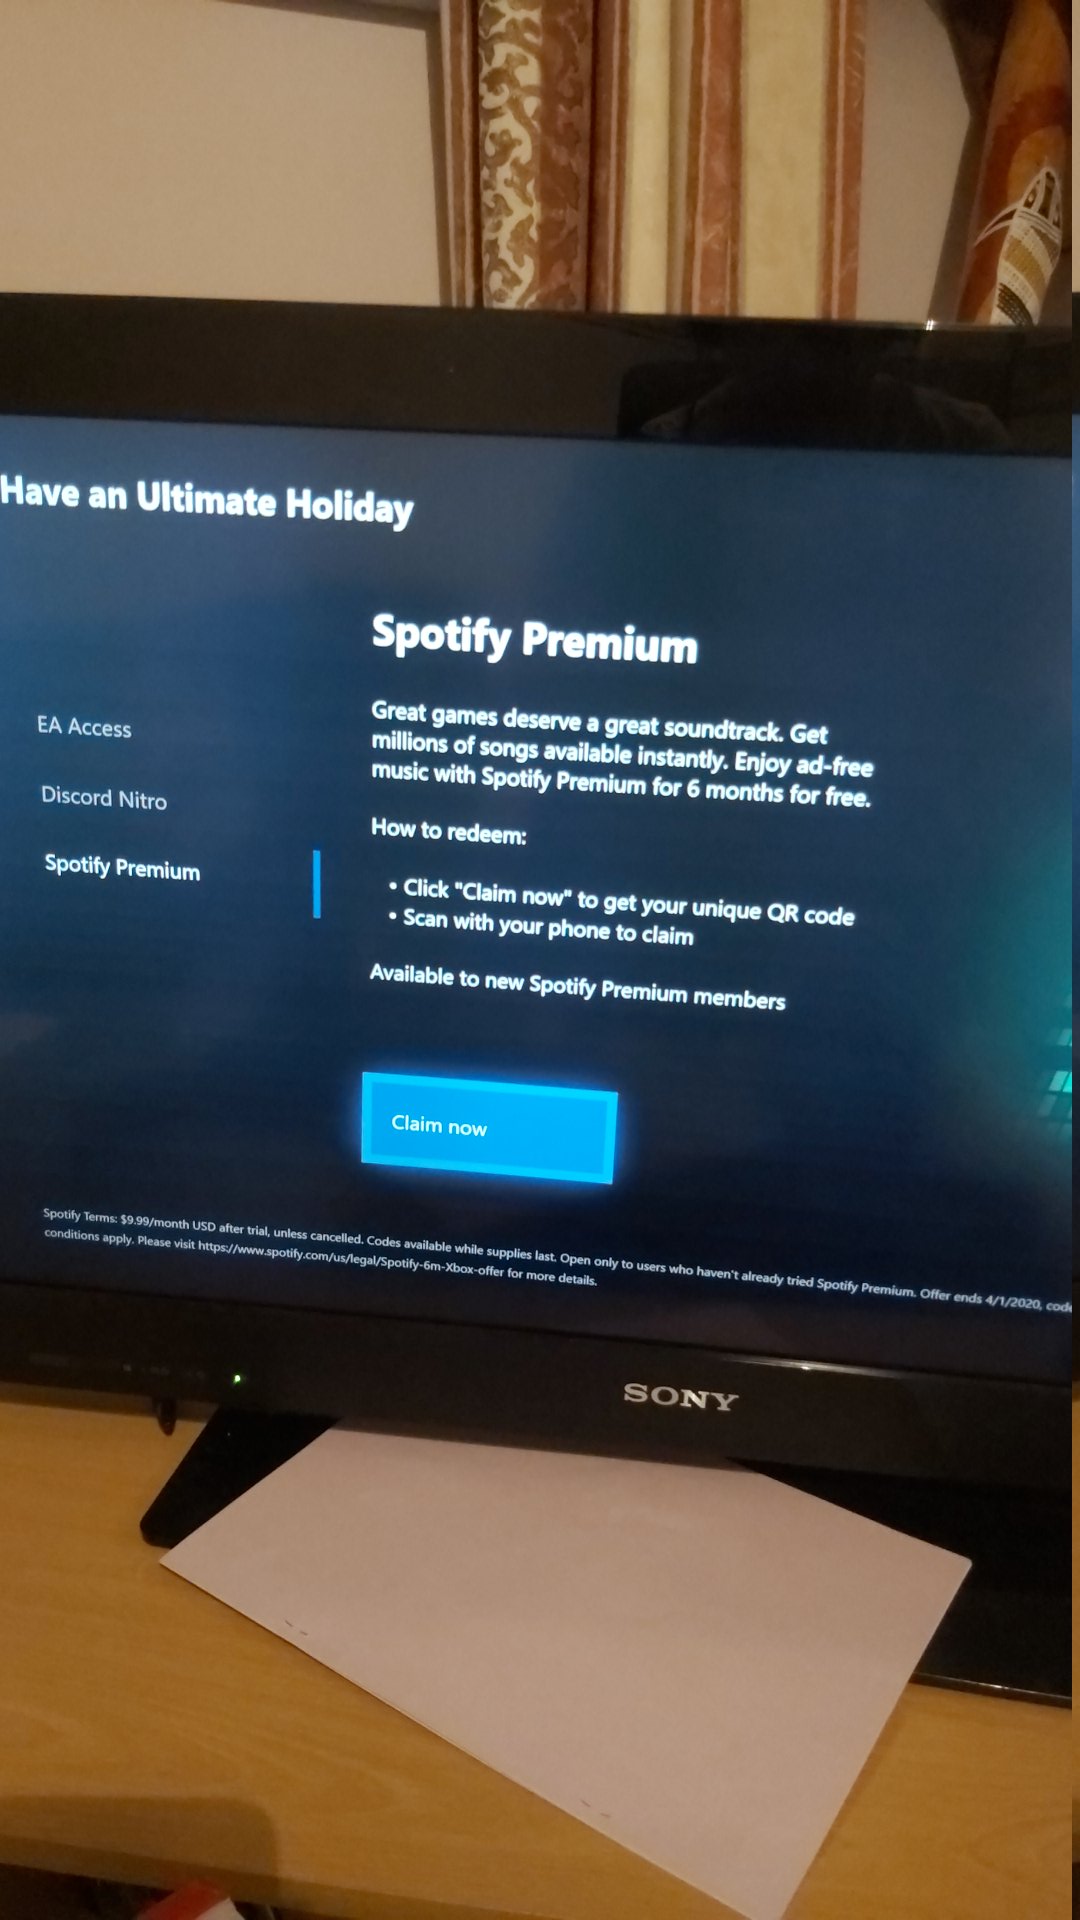 xbox game pass spotify offer